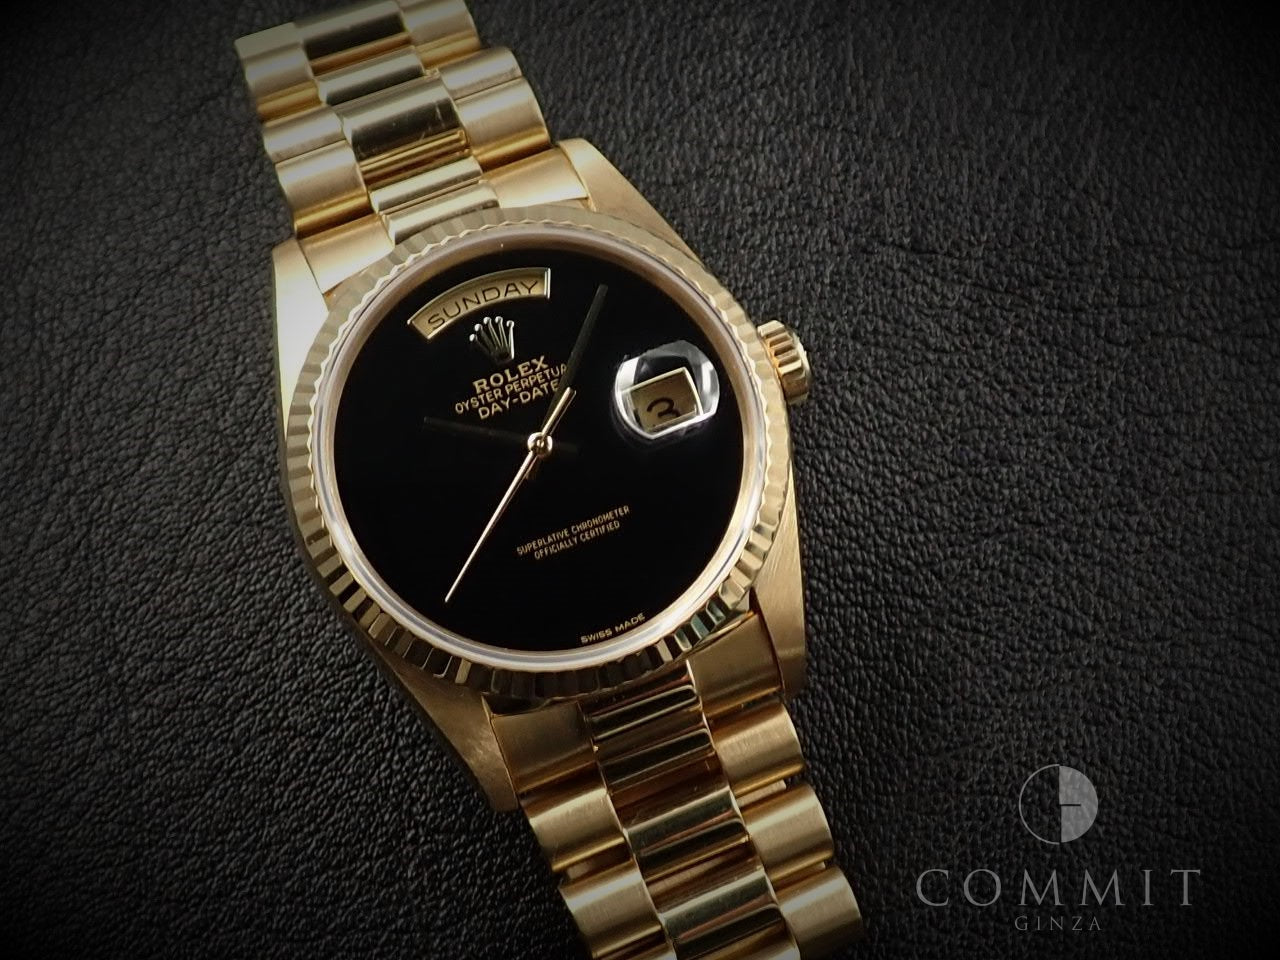 Rolex Day-Date &lt;Warranty box and other details&gt;